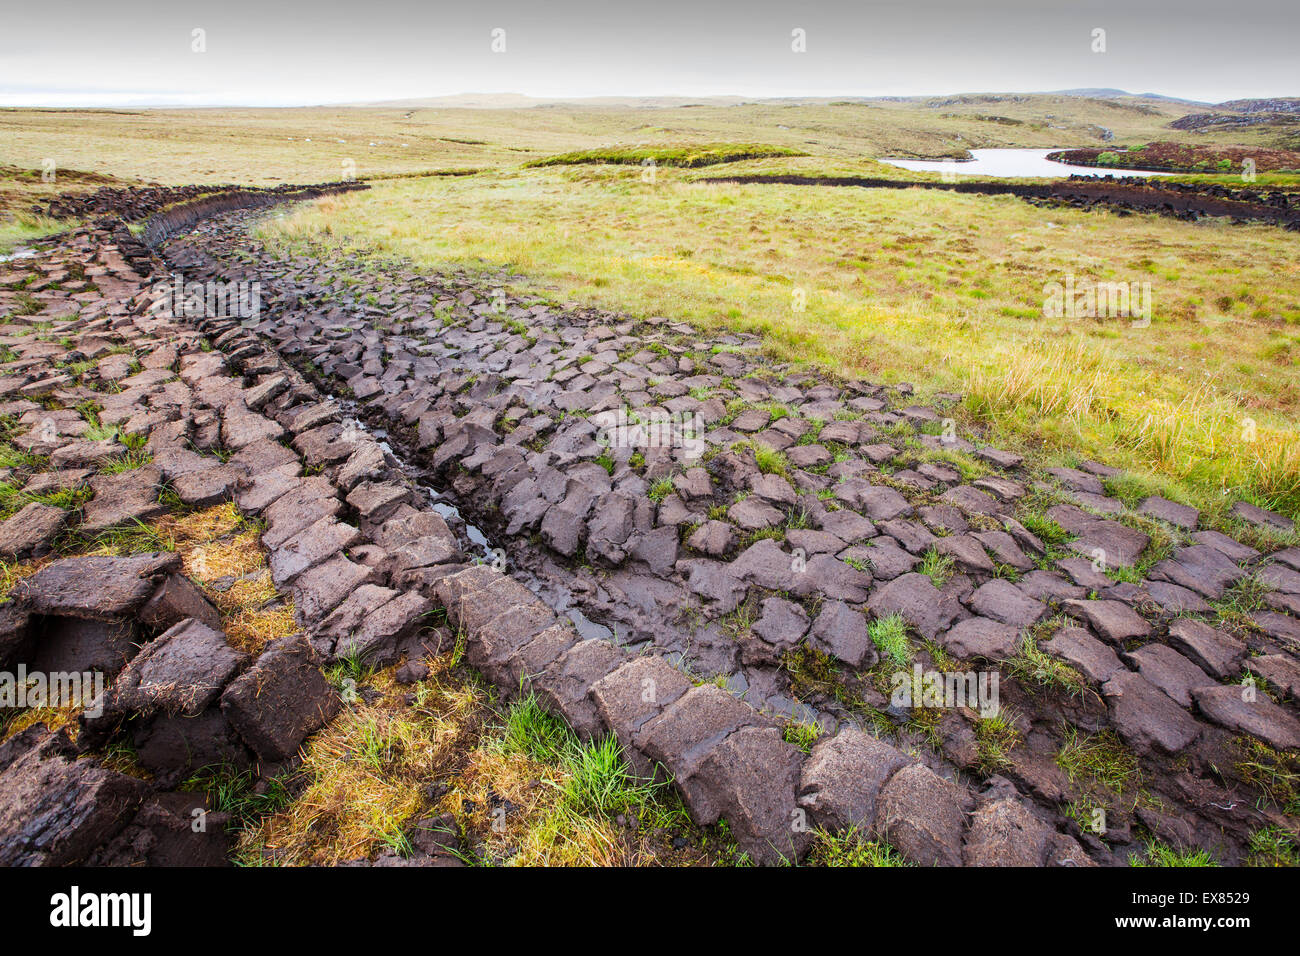 Peat cutting for fuel on the Isle of Lewis near Stornoway, Outer Hebrides, Scotland, UK. Stock Photo